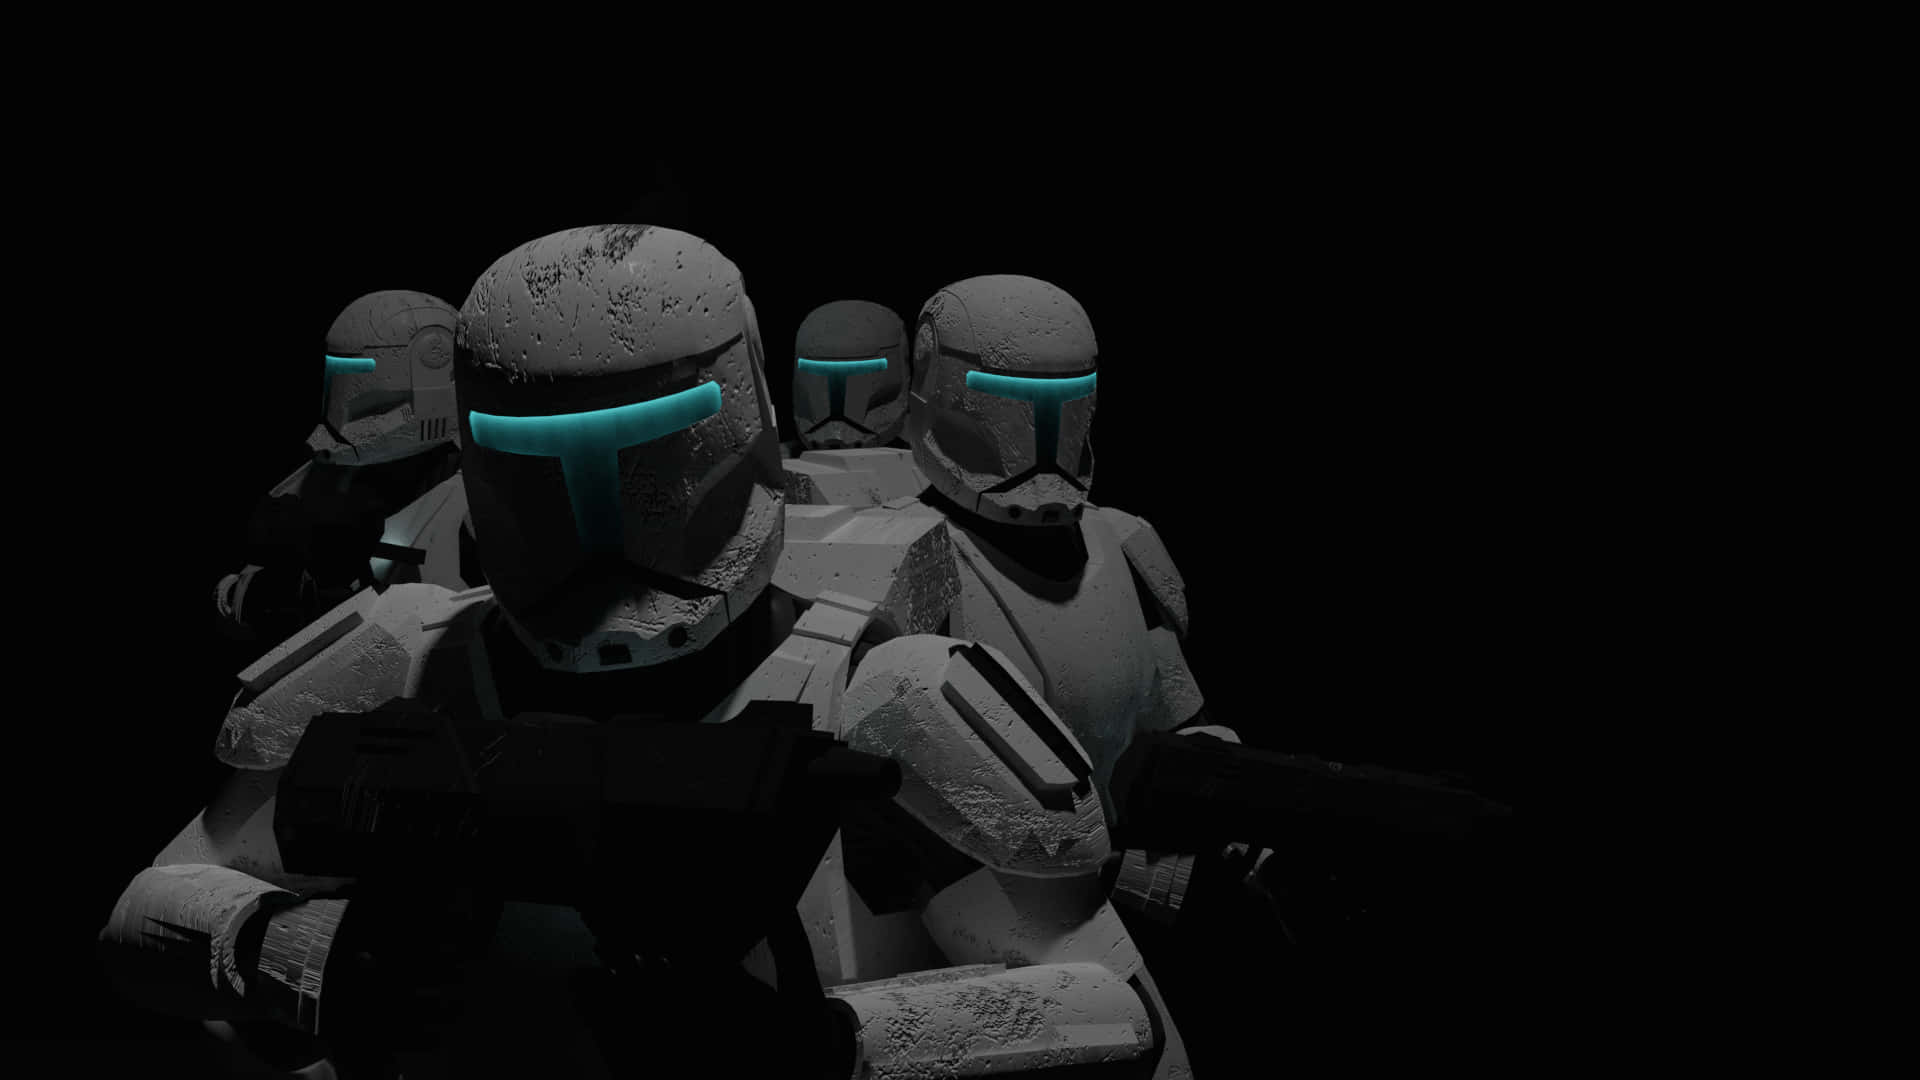 Elite squad of Republic Commando soldiers ready for action Wallpaper